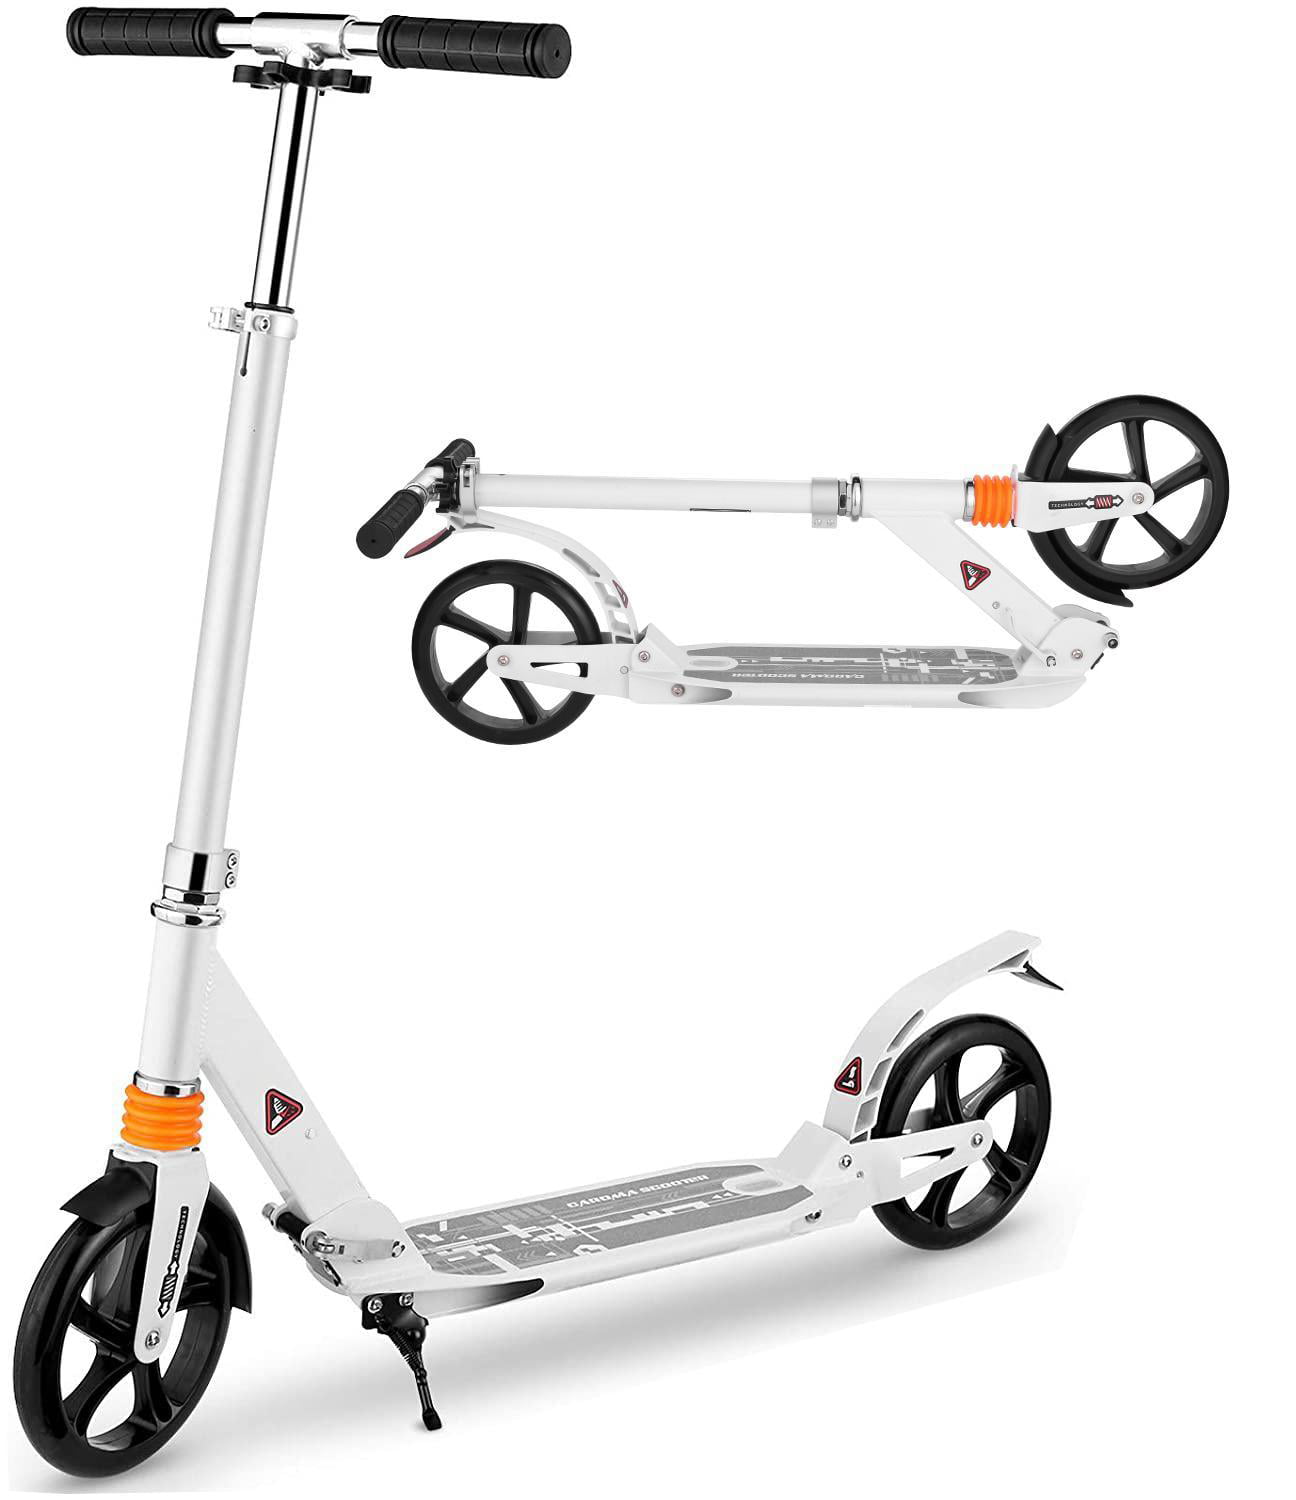 Folding Adult Kick Scooter Adjustable Height Dual Suspension Outdoor Ride Push 